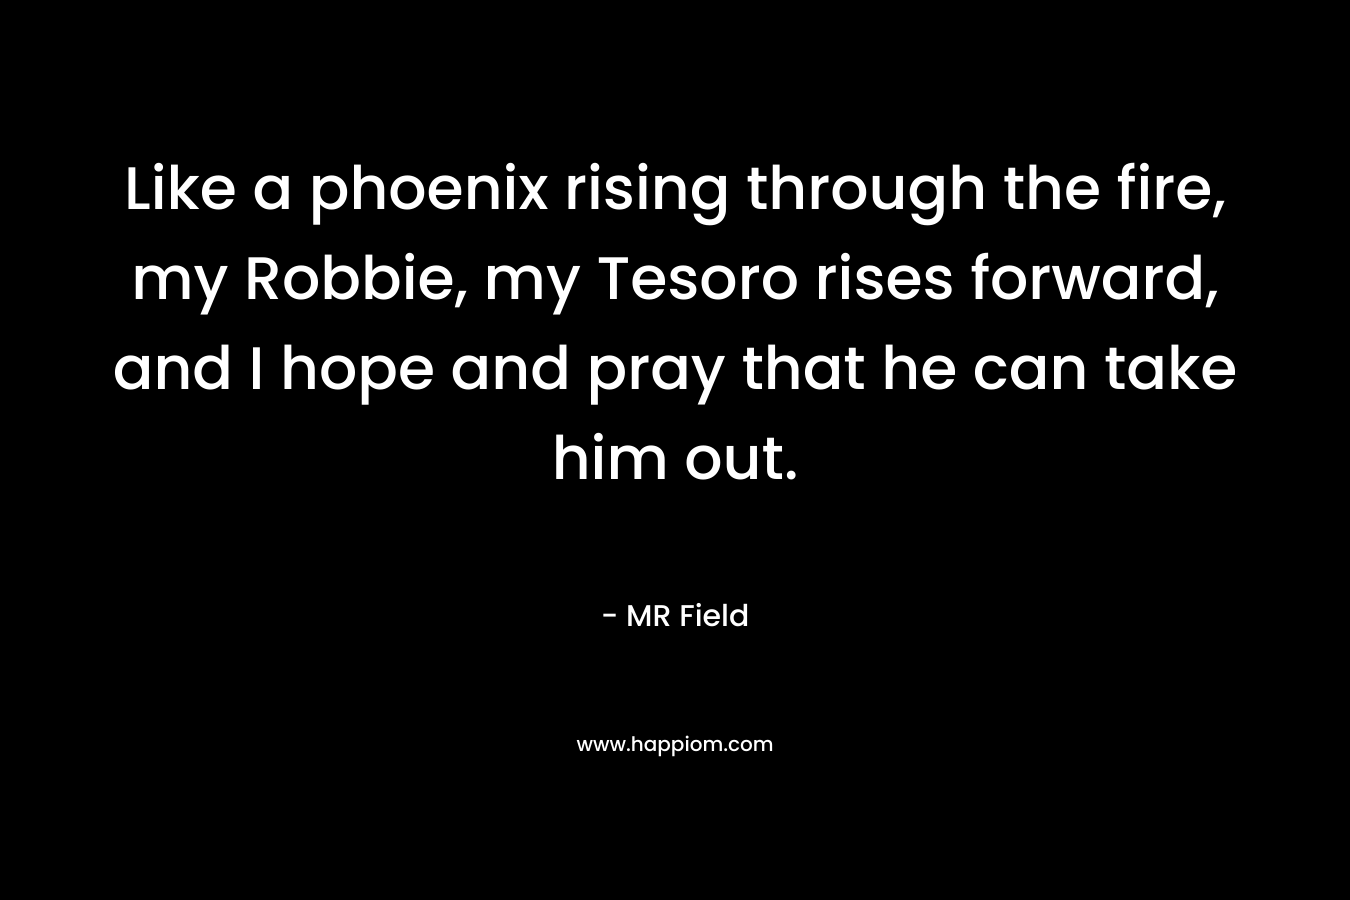 Like a phoenix rising through the fire, my Robbie, my Tesoro rises forward, and I hope and pray that he can take him out. – MR Field